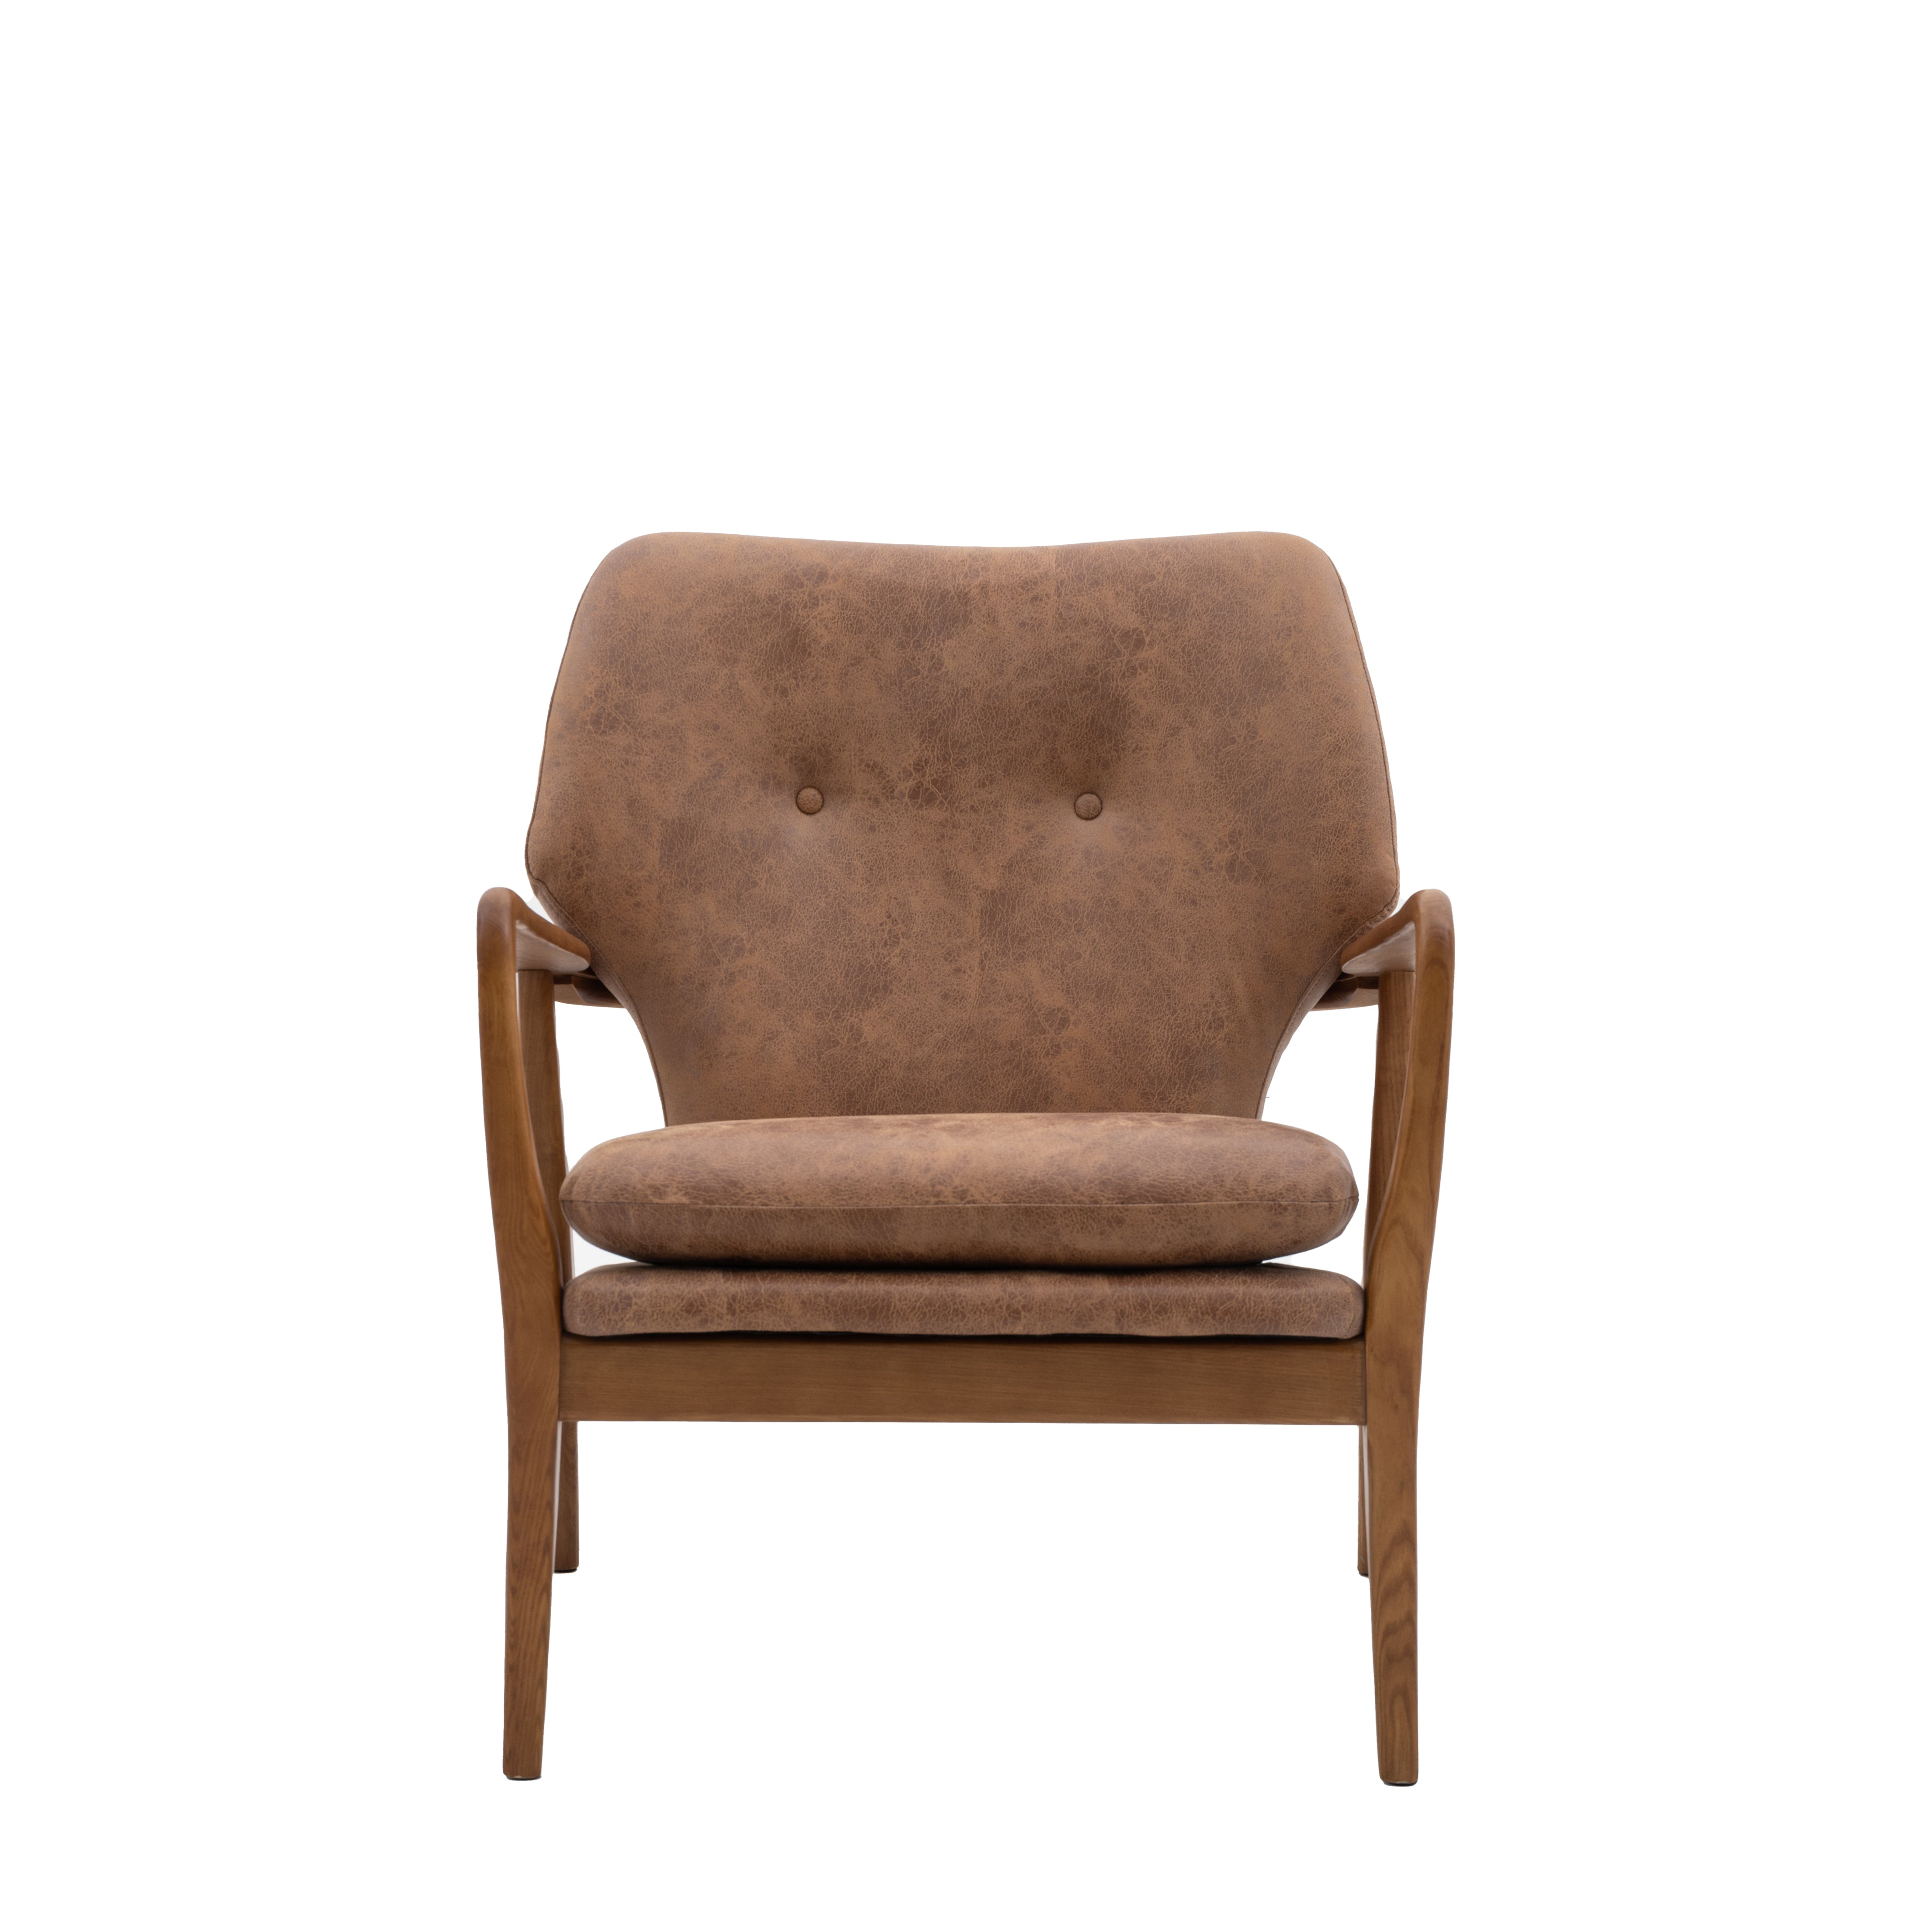 Fistral Mid Century Style Wooden Armchair Ash and Linen